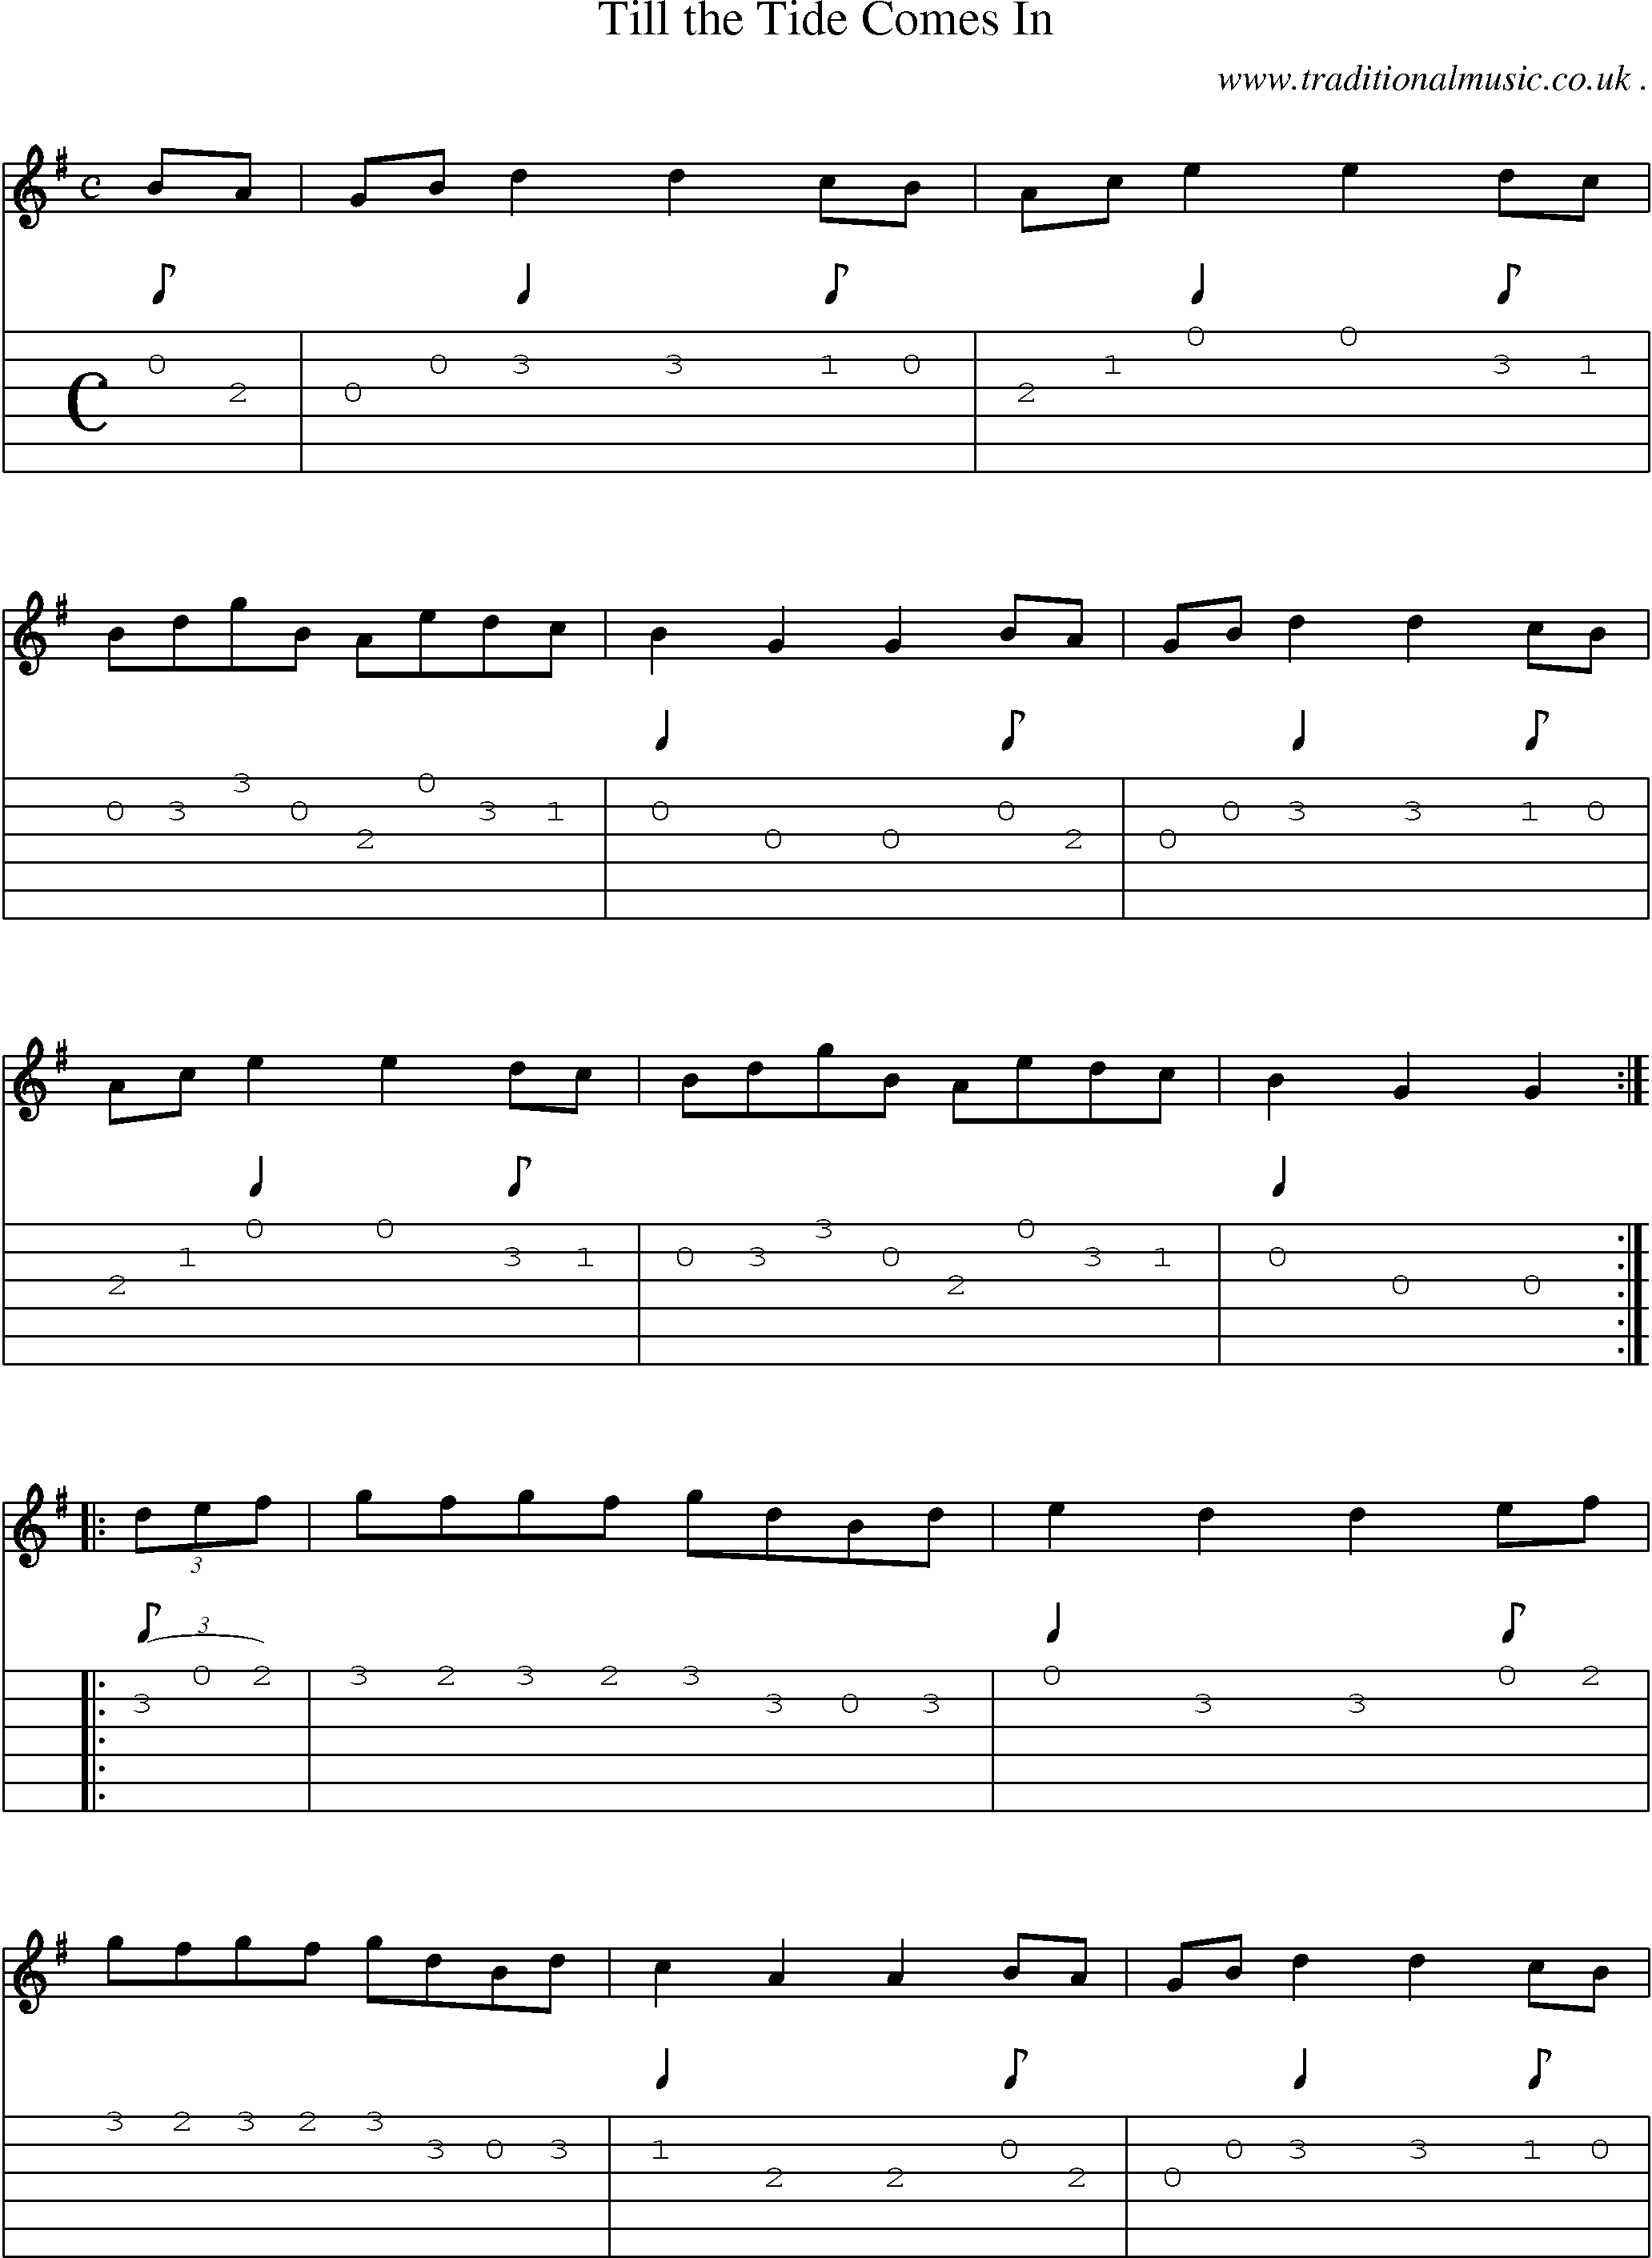 Sheet-Music and Guitar Tabs for Till The Tide Comes In